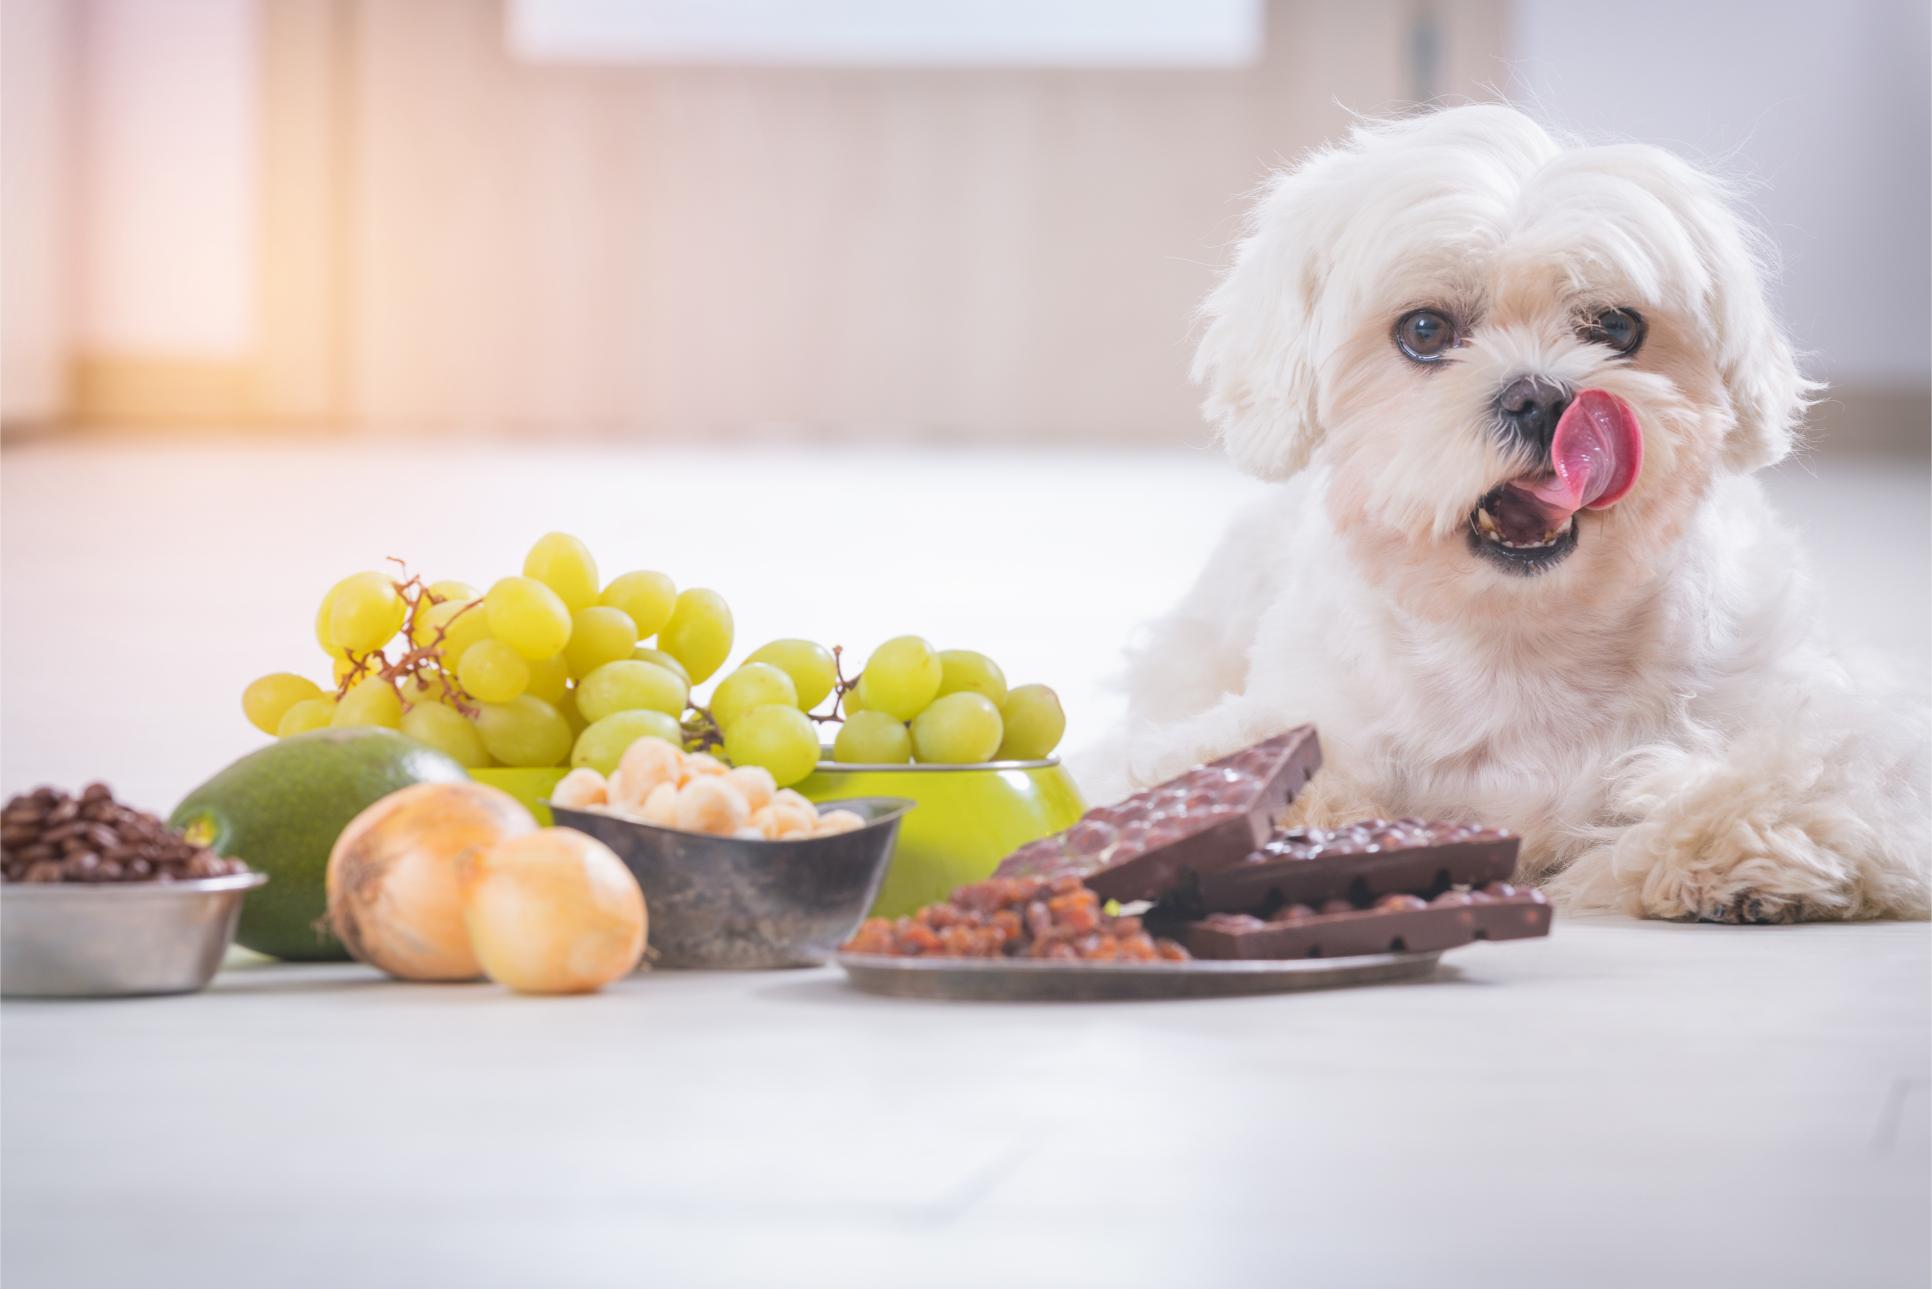 little dog in front of grapes and nuts.